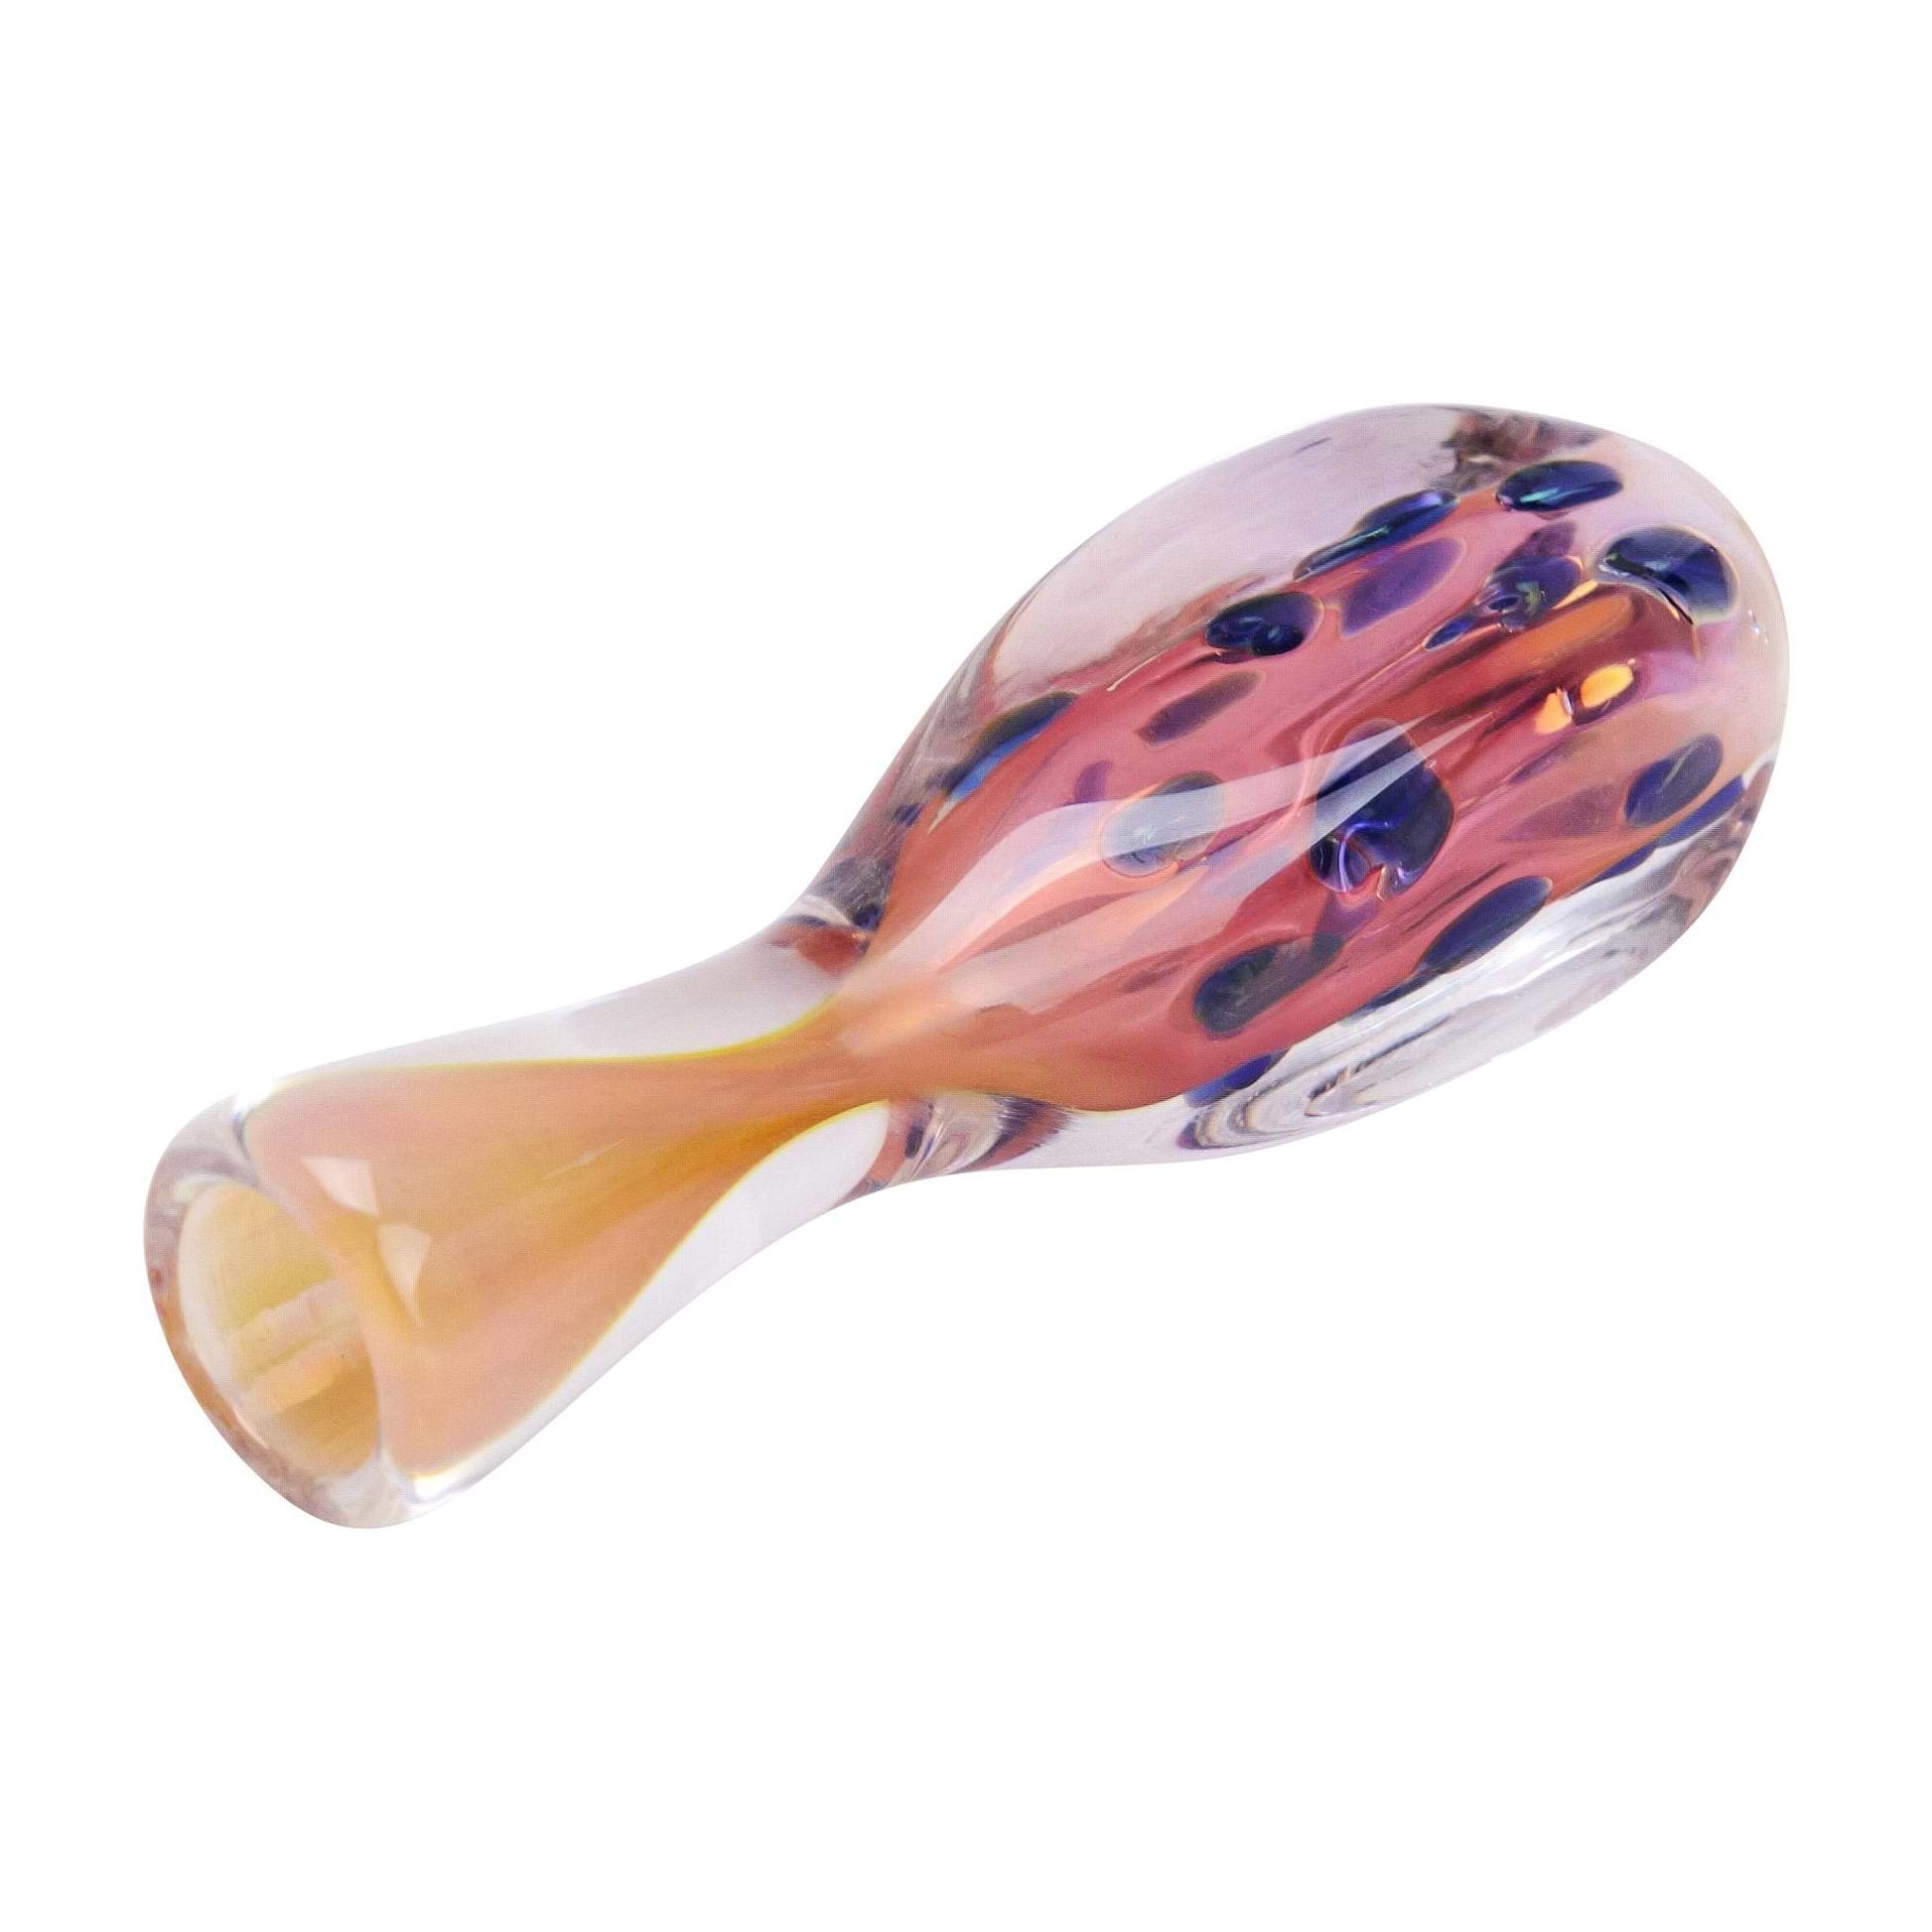 Easy-to-hold and compact multicolored glass oney smoking device glass pipe with a fascinating tadpole shape and look